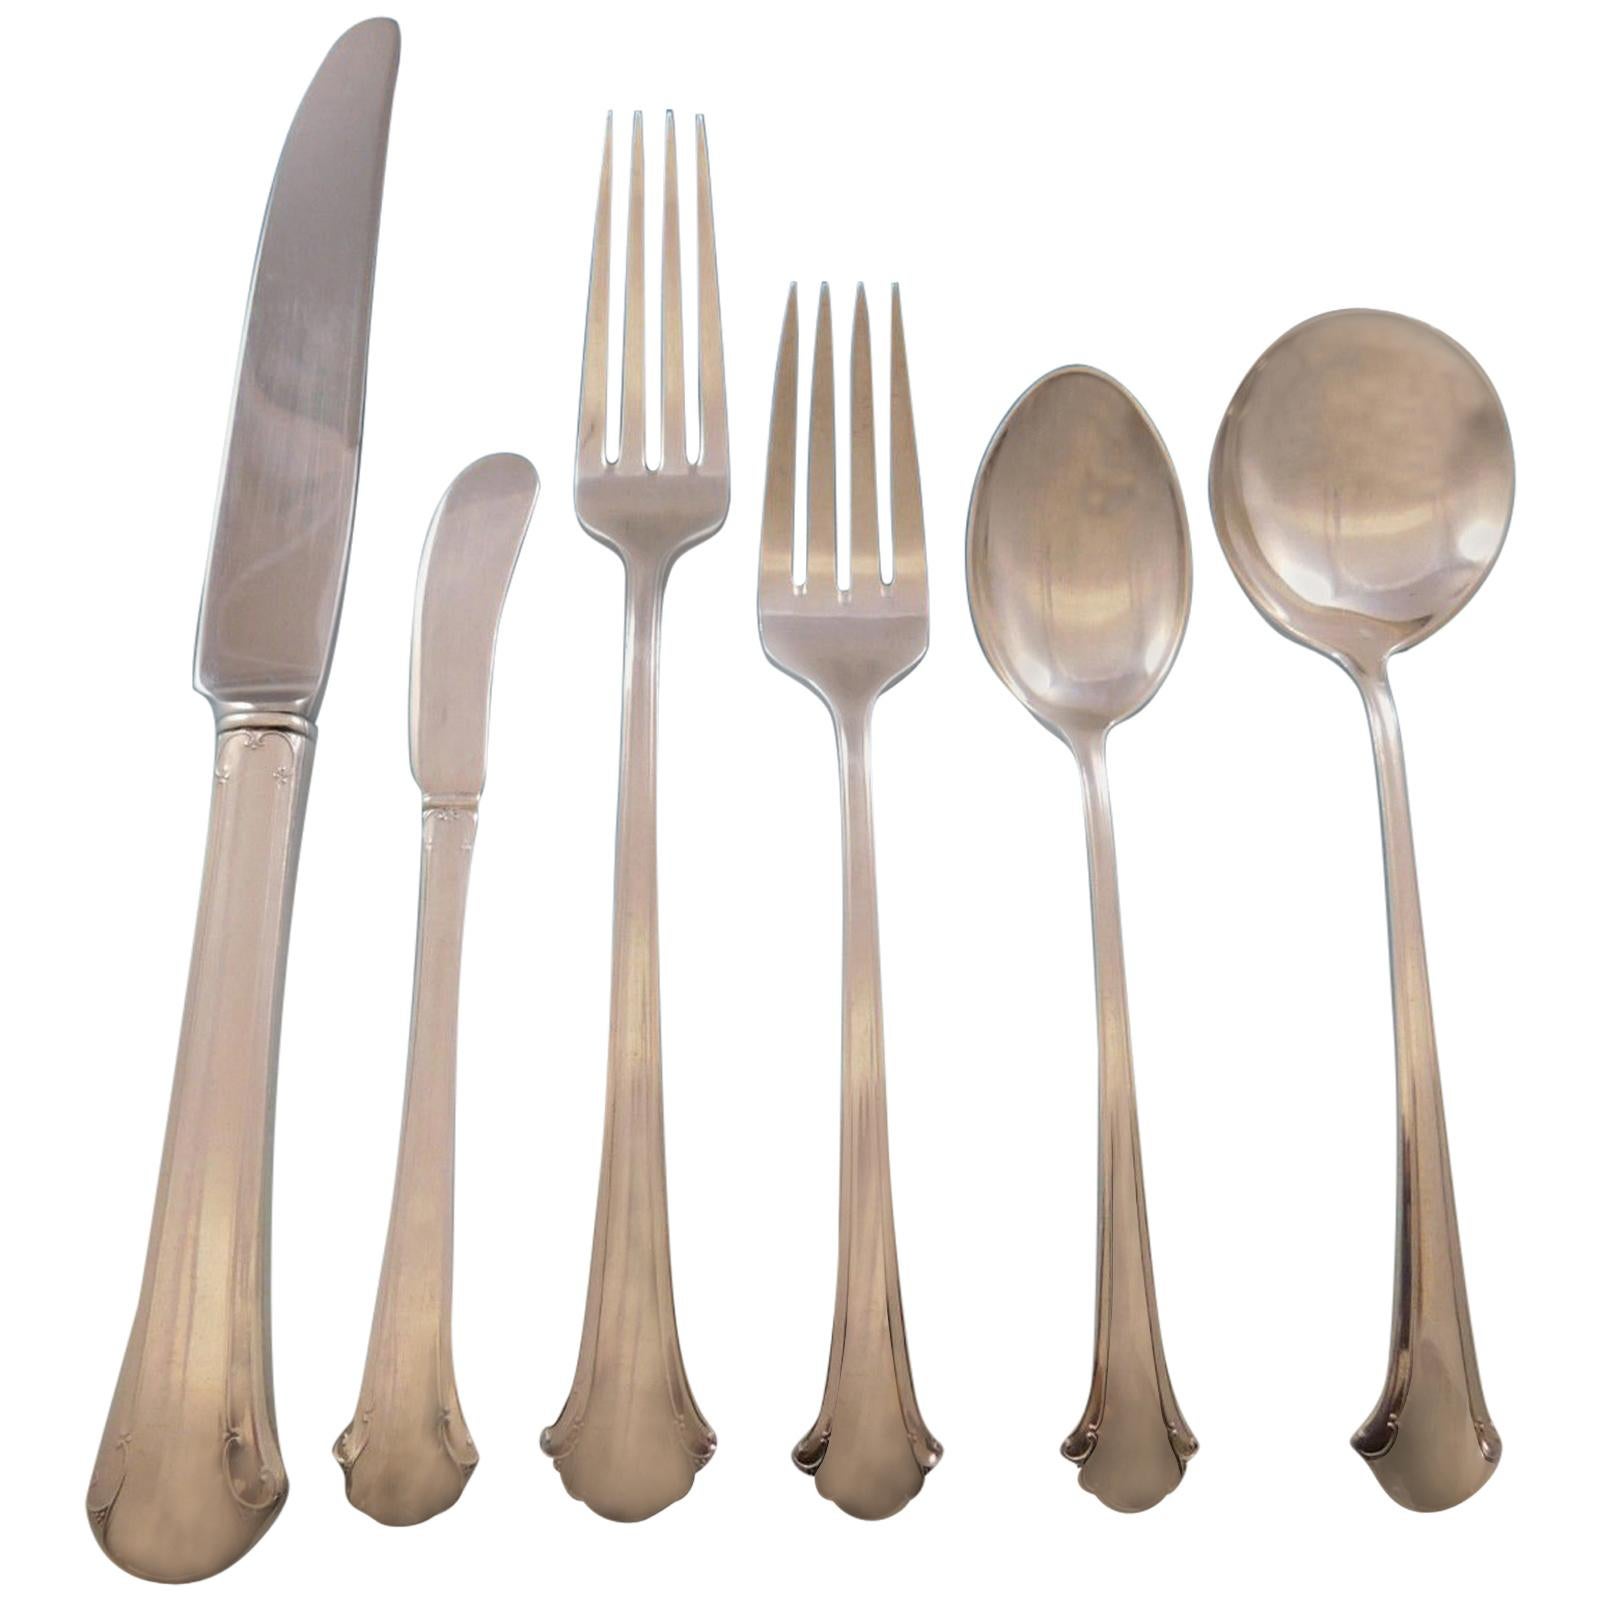 4 TOWLE STERLING CHIPPENDALE 6 1//8/" TEASPOONS NO MONOGRAMS